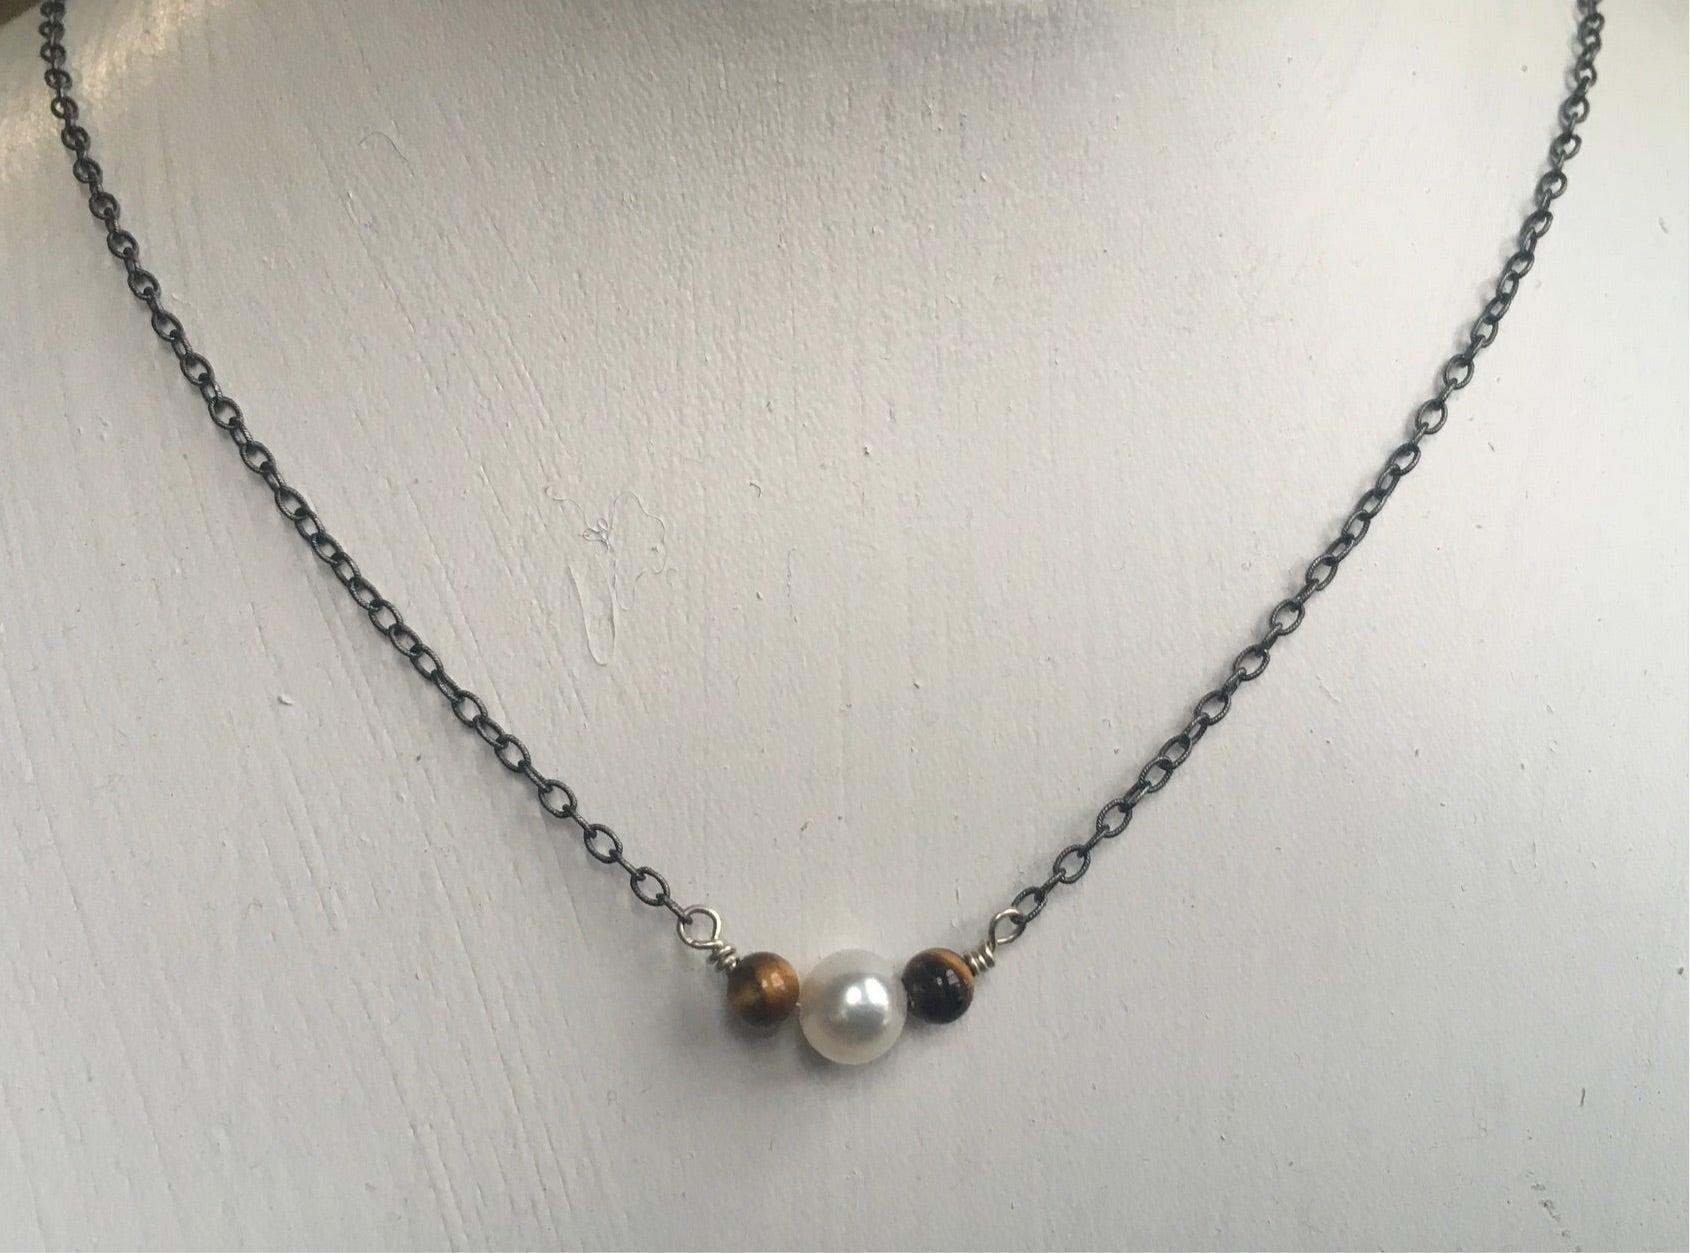 Real Pearls for Real Men! Single Pearl Choker on Chain with Tiger Eye Jewelry, Necklace, Choker Bourdage Pearl Jewelry    sherri bourdage